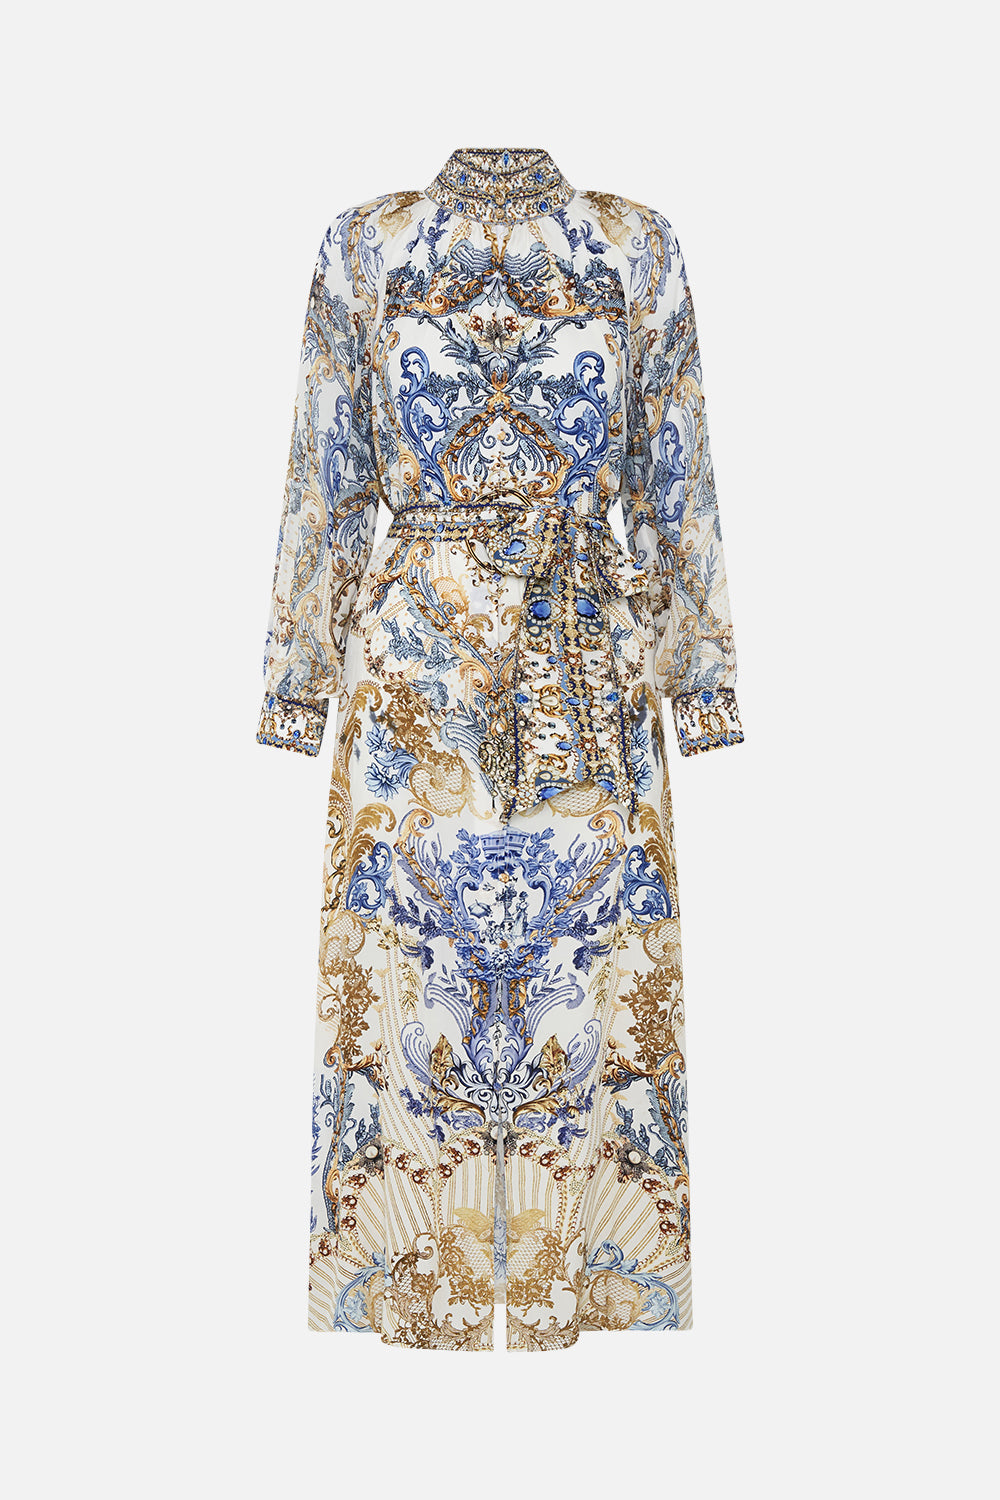 Product view of CAMILLA silk midi dress in Soul Searching print